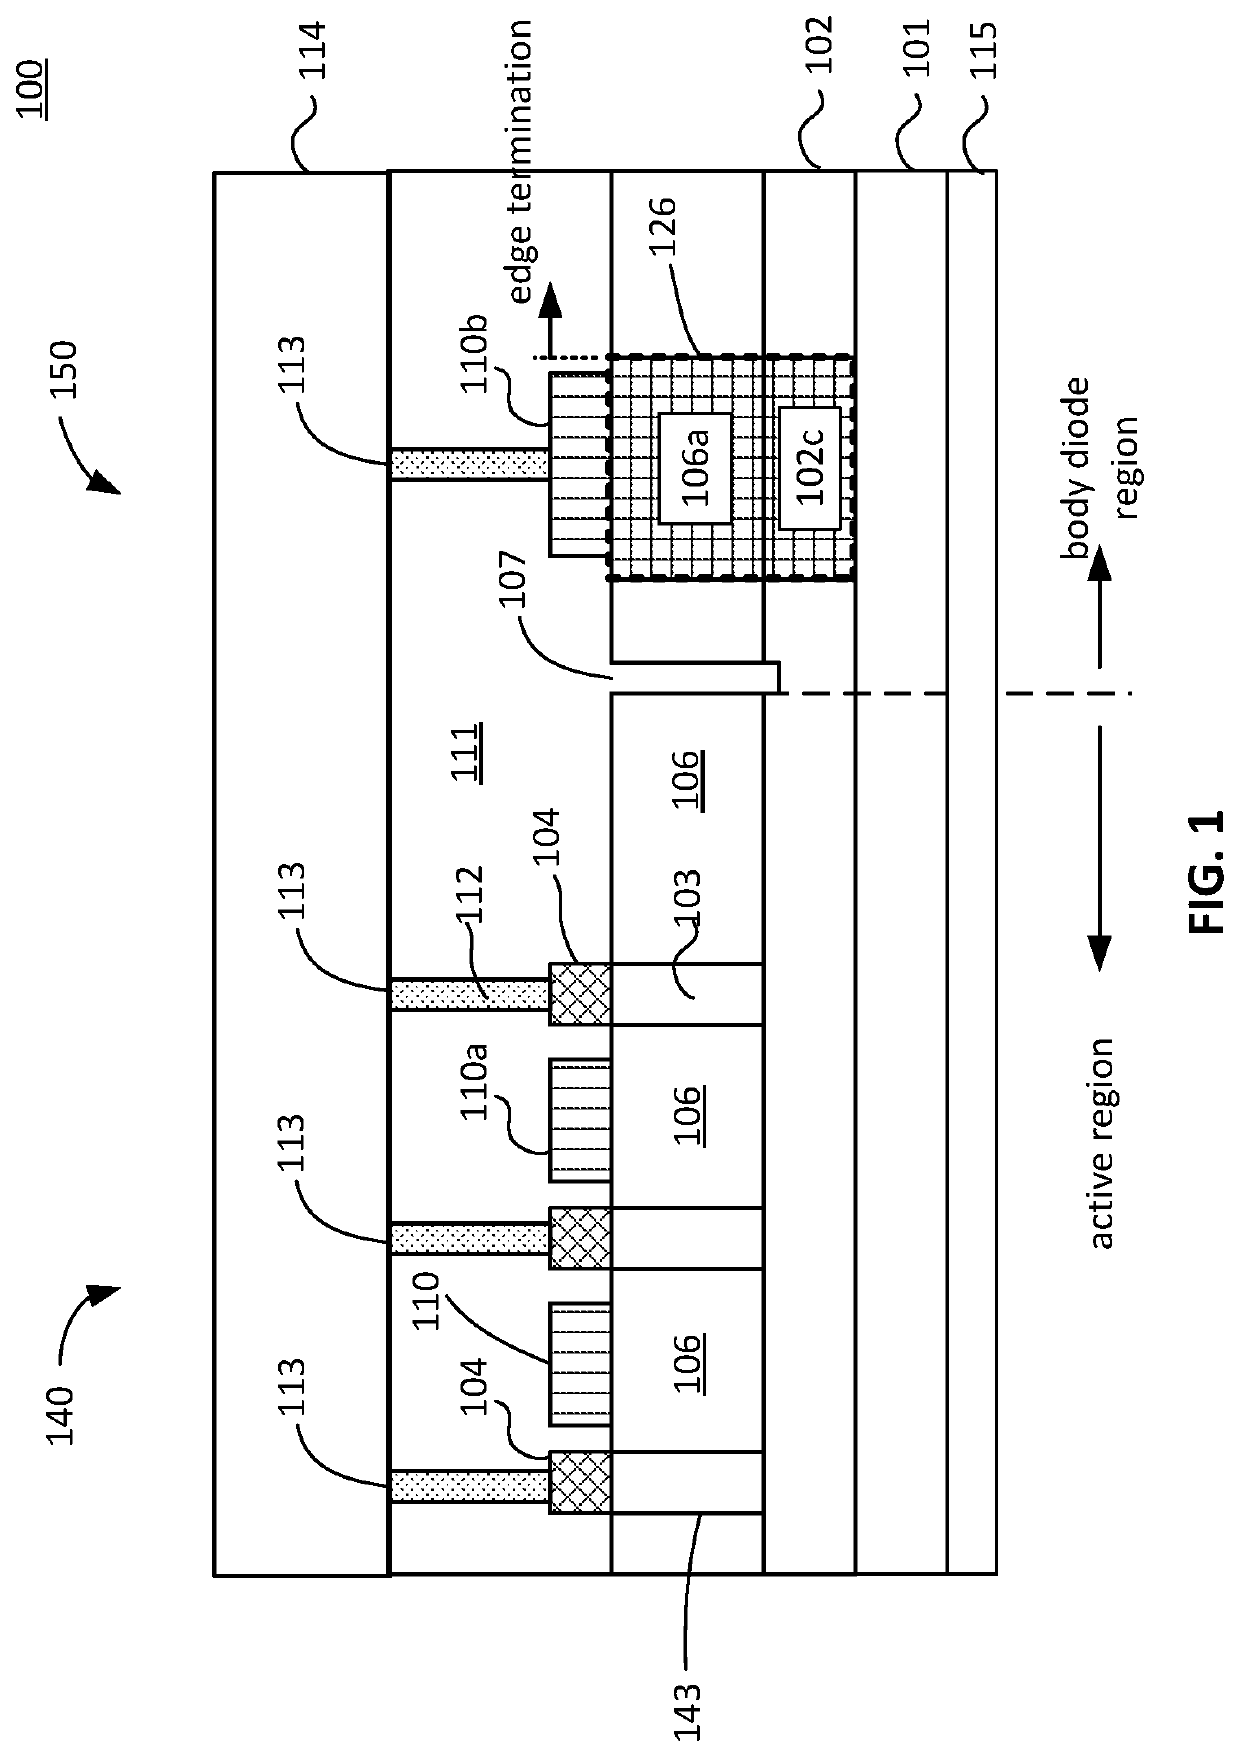 Method and system for jfet with implant isolation